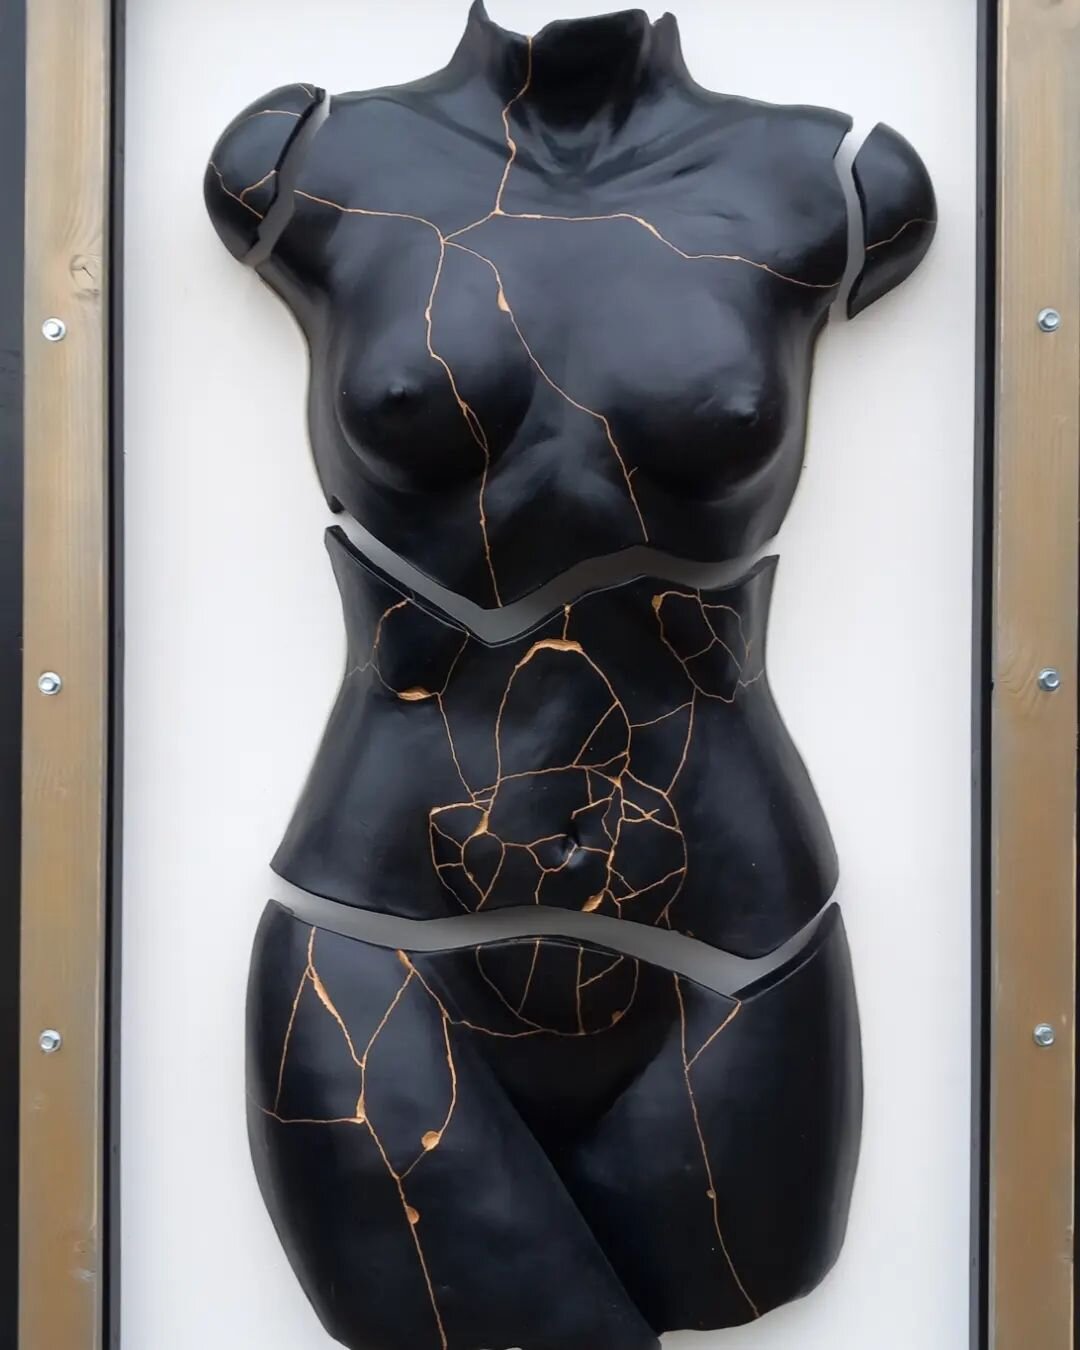 LIFE.One of my favourite Kintsugi sculptures.  Was painstakingly and with love put back together after it exploded in kiln. 

#Kintsugi #art #sculptures #femaleform #ceramics #love #mentalhealth #artforsale #blackandgold #bangorni